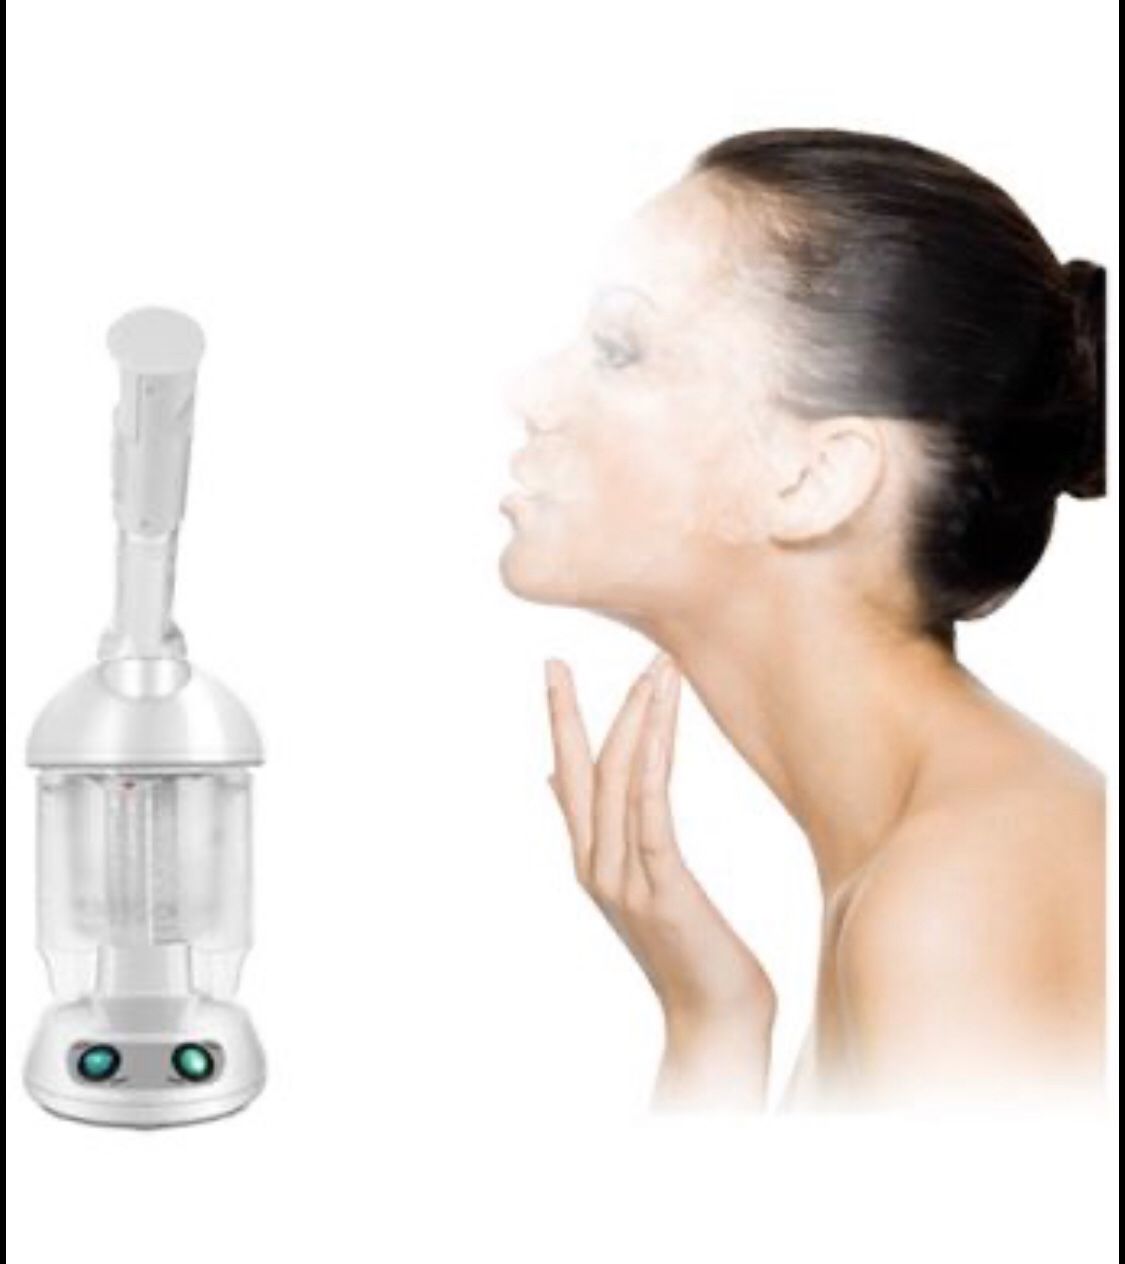 Large 2-in-1 Hair and Facial Steamer Face Steamer Humidifier Hot Mist Moisturizing Skin Care